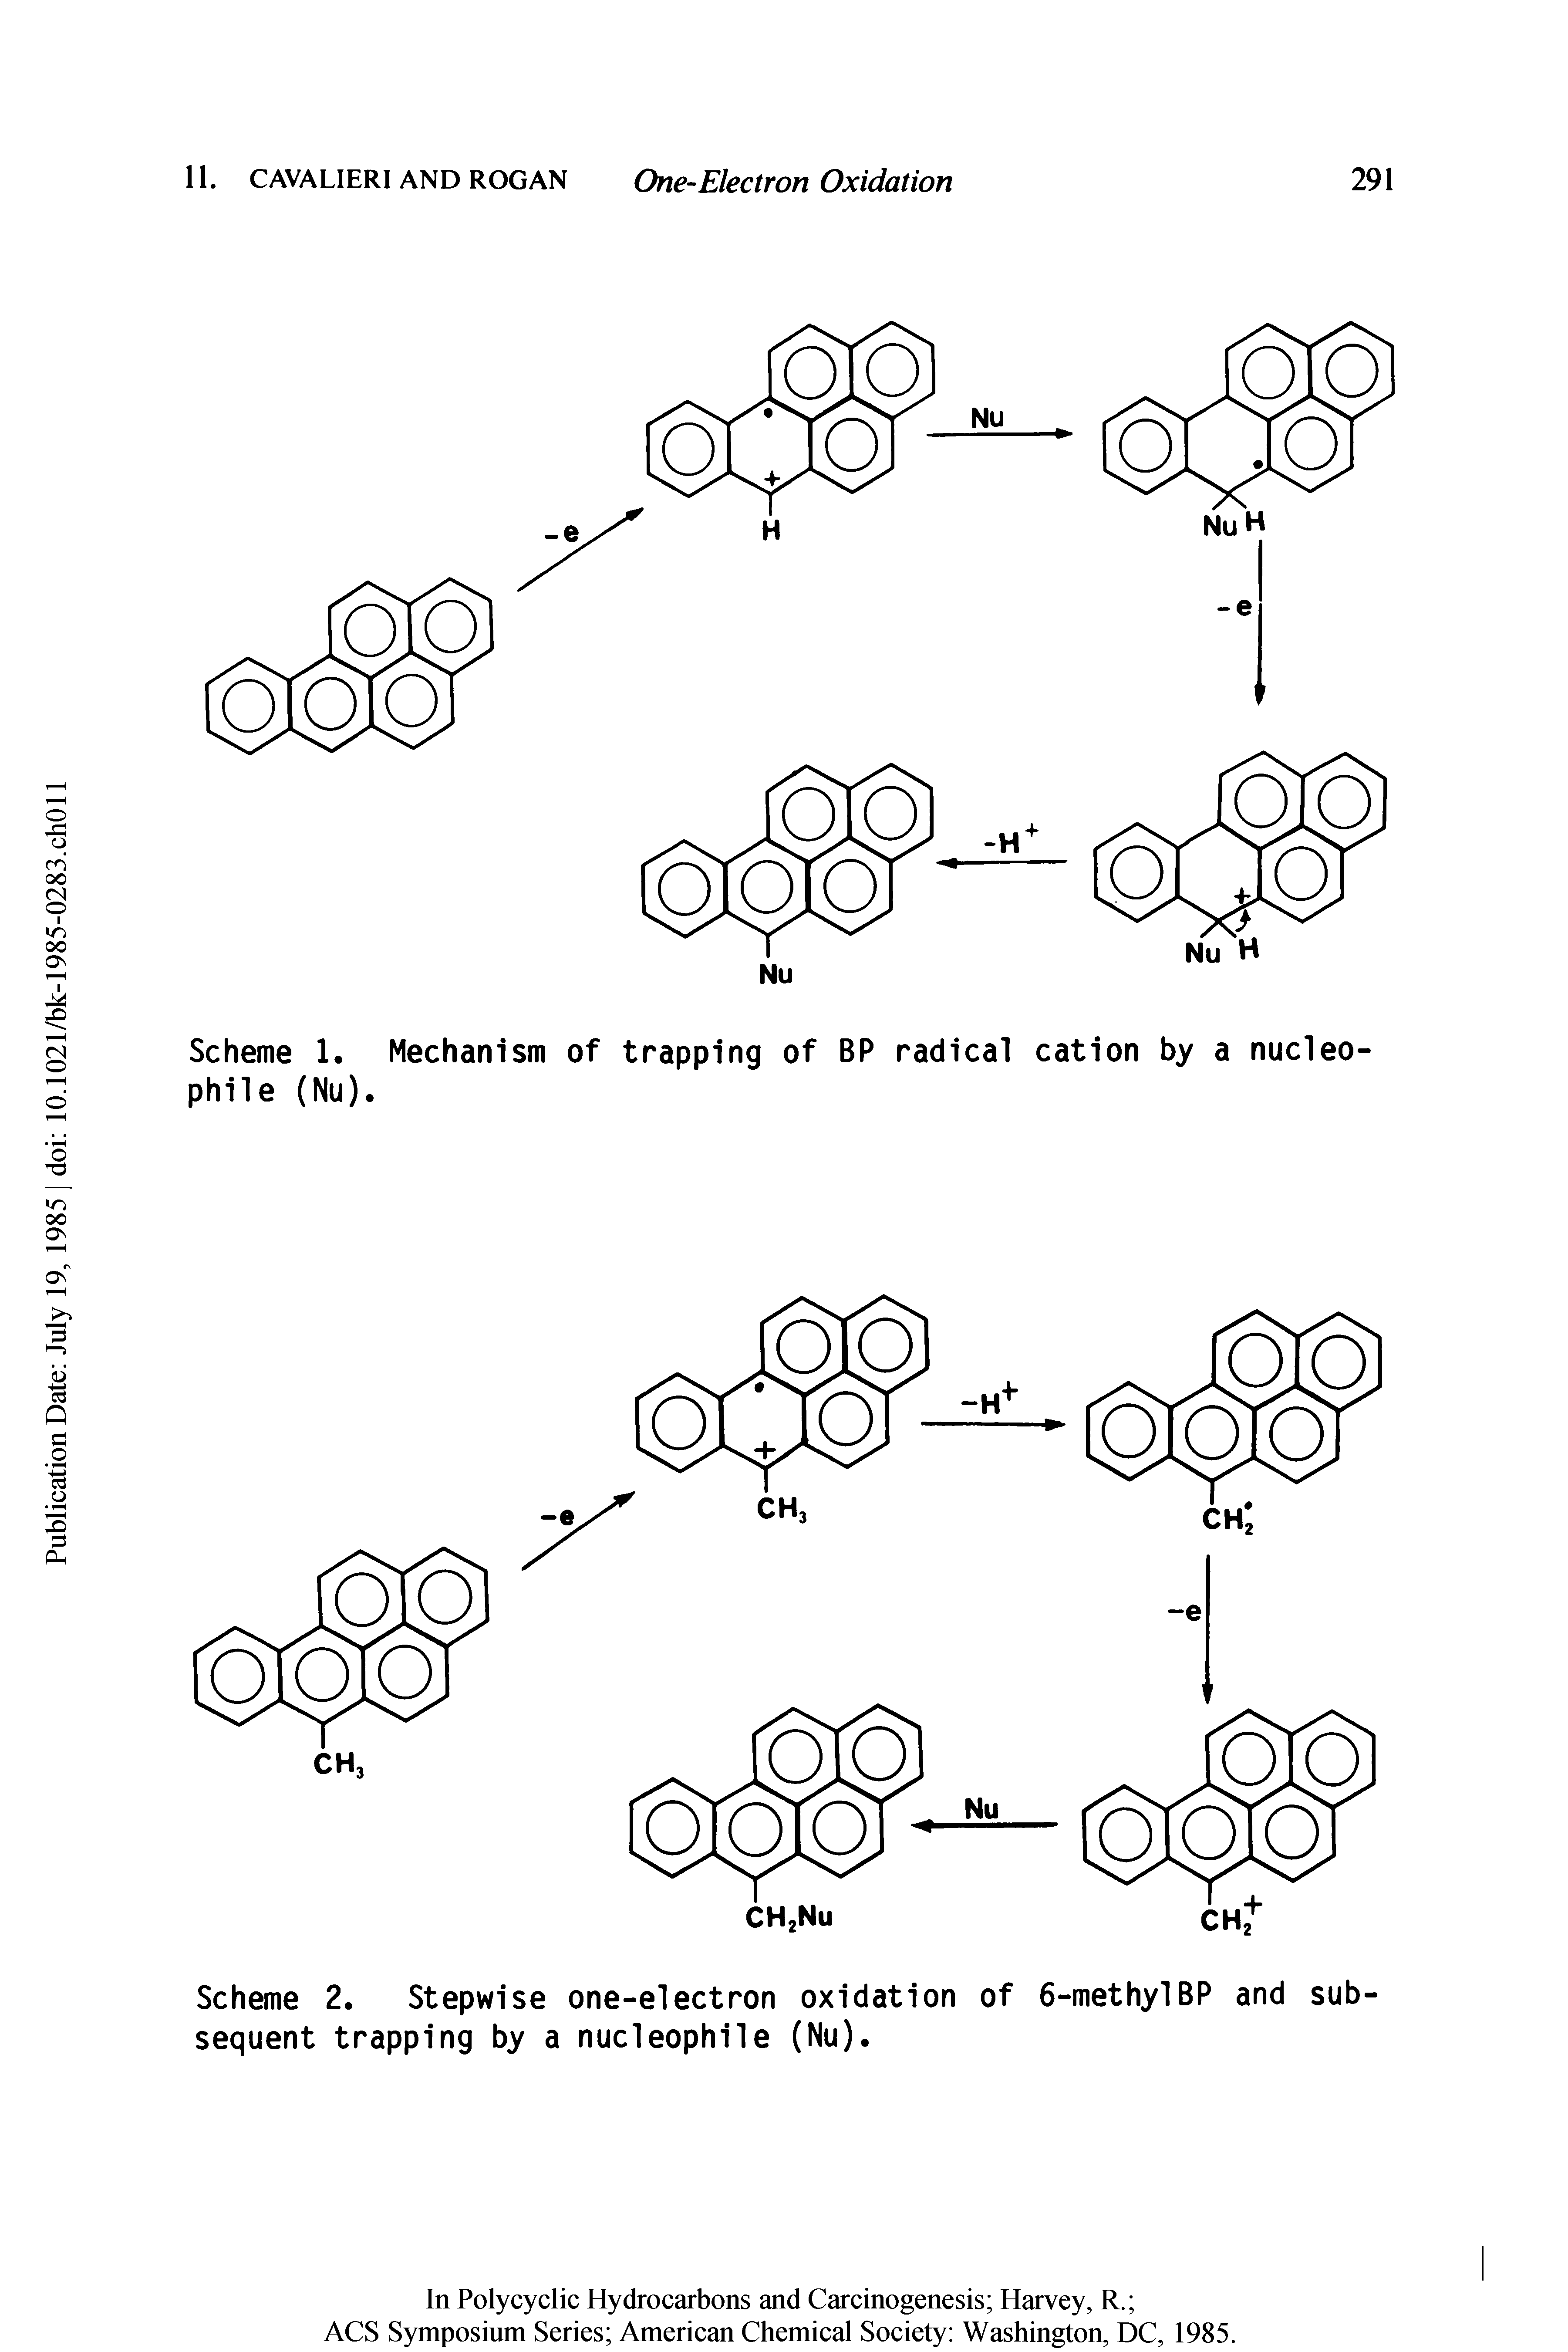 Scheme 1. Mechanism of trapping of BP radical cation by a nucleophile (Nu).